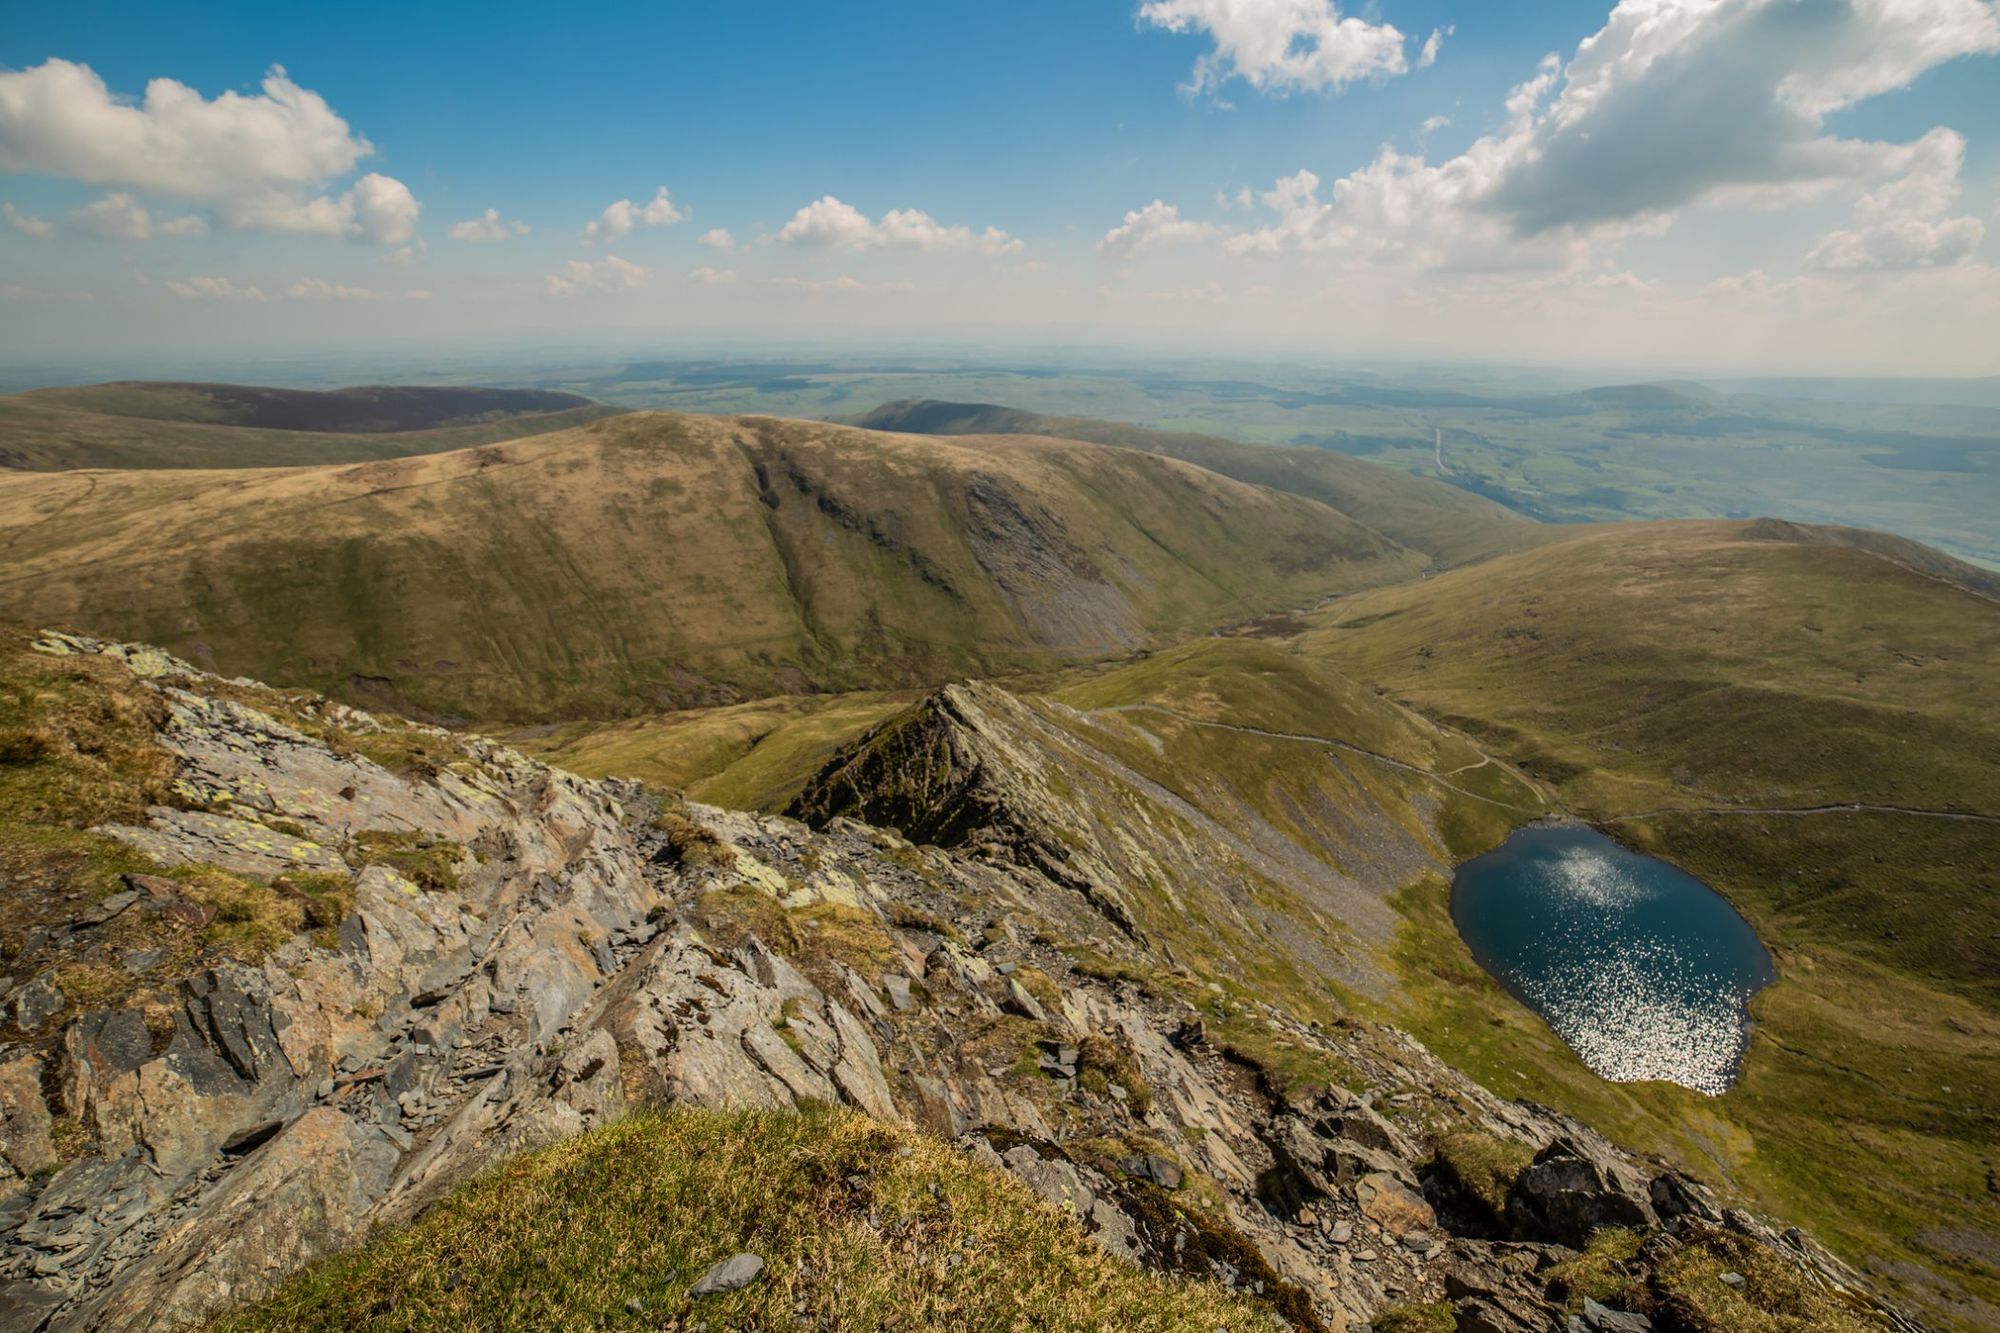 Looking out over the Lake District from Sharp Edge, Blencathra. Photo: Getty